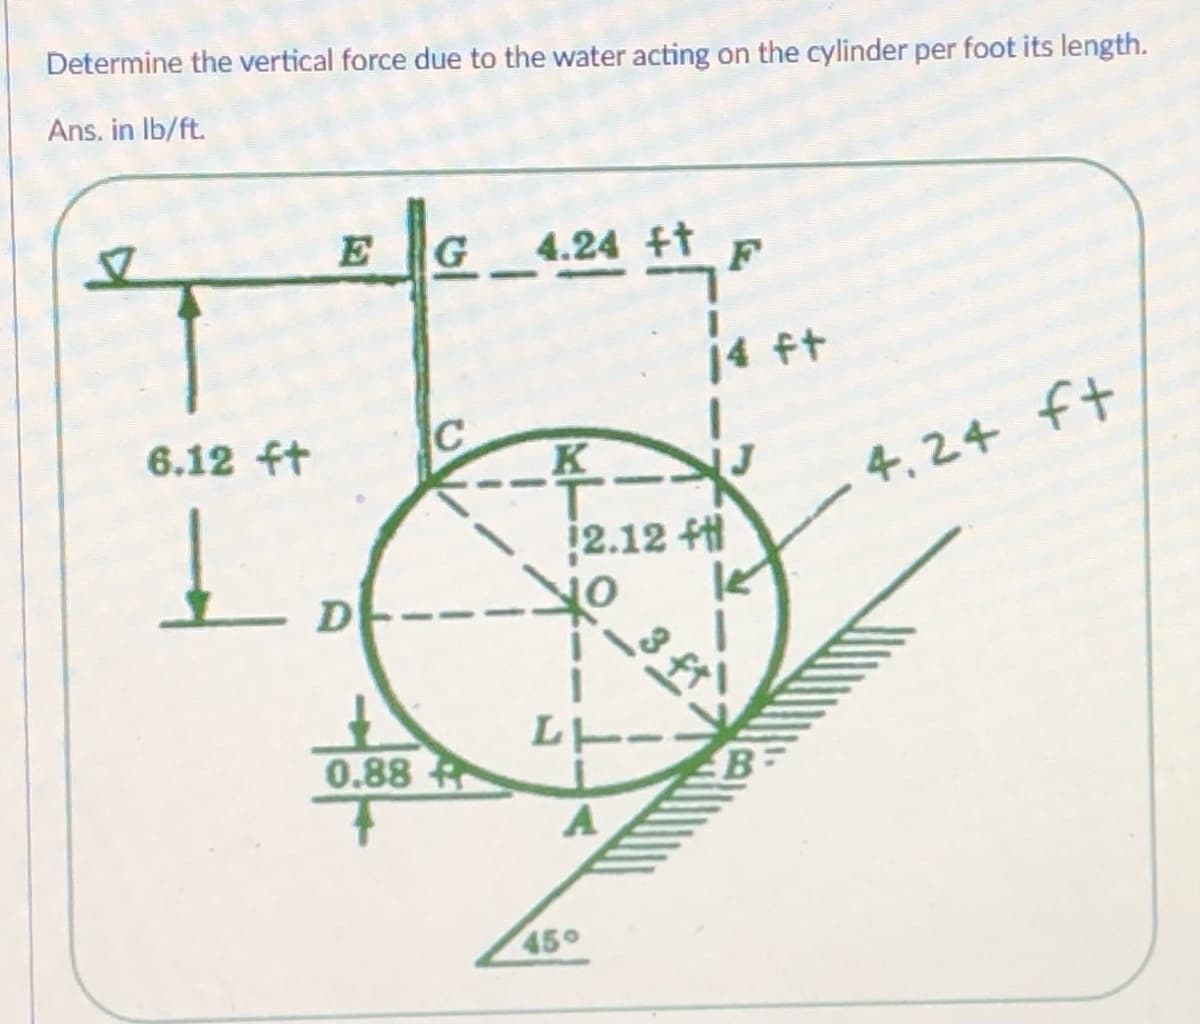 Determine the vertical force due to the water acting on the cylinder per foot its length.
Ans. in Ib/ft.
G_424 ,F
E
14 ft
C
K
6.12 ft
-4.24 ft
2.12 fH
D
3 ft
LT
0.88 R
450
